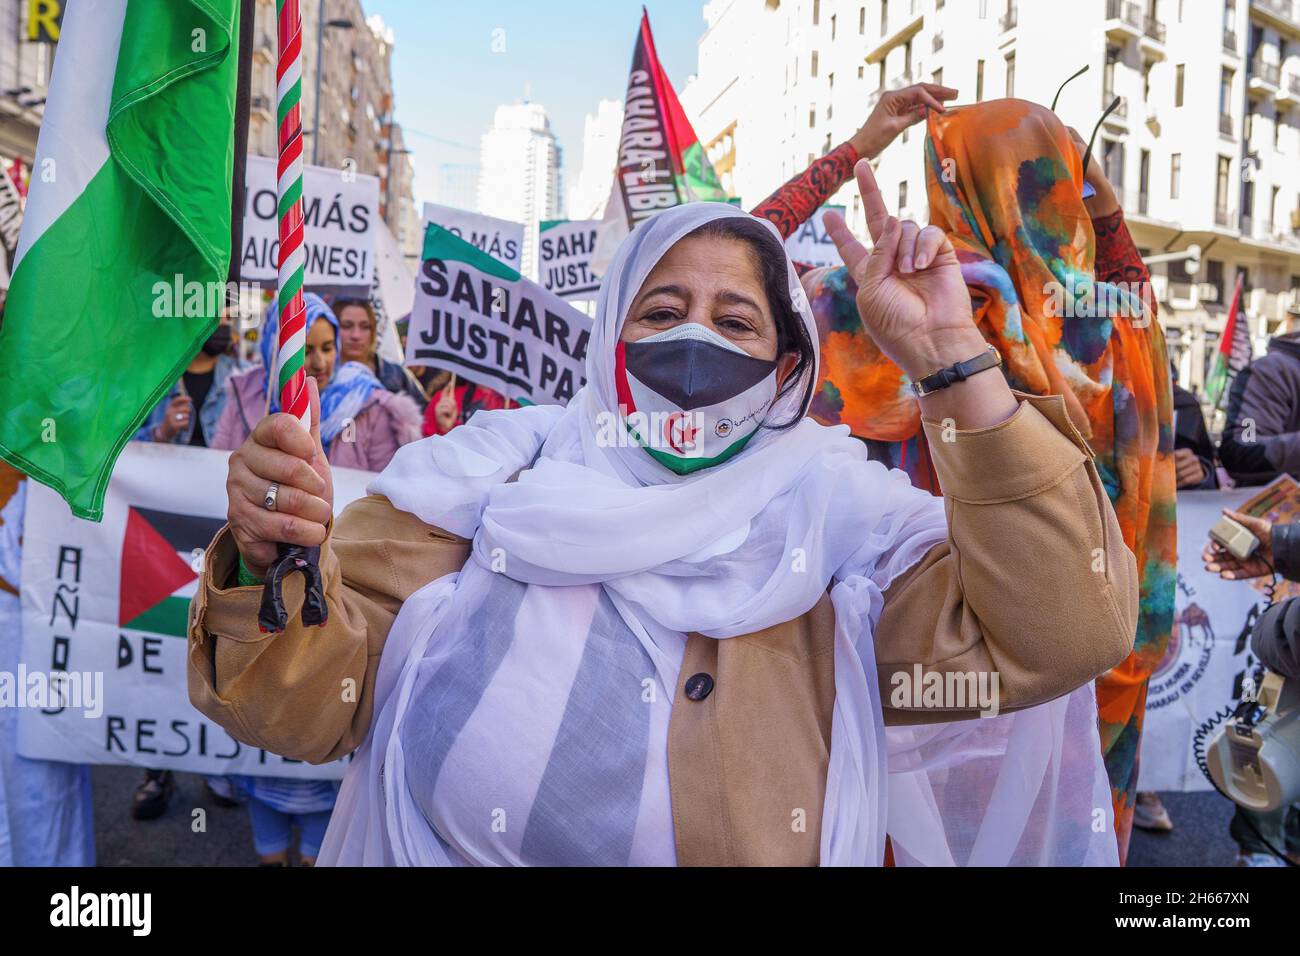 Madrid, Spain. 12th June, 2021. A protester gestures during a demonstration.Activists held a protest against the human rights abuses against the Saharawi people and to call for the ''liberation of Western Sahara'' in Gran Via Street in Madrid, Spain. (Credit Image: © Atilano Garcia/SOPA Images via ZUMA Press Wire) Stock Photo